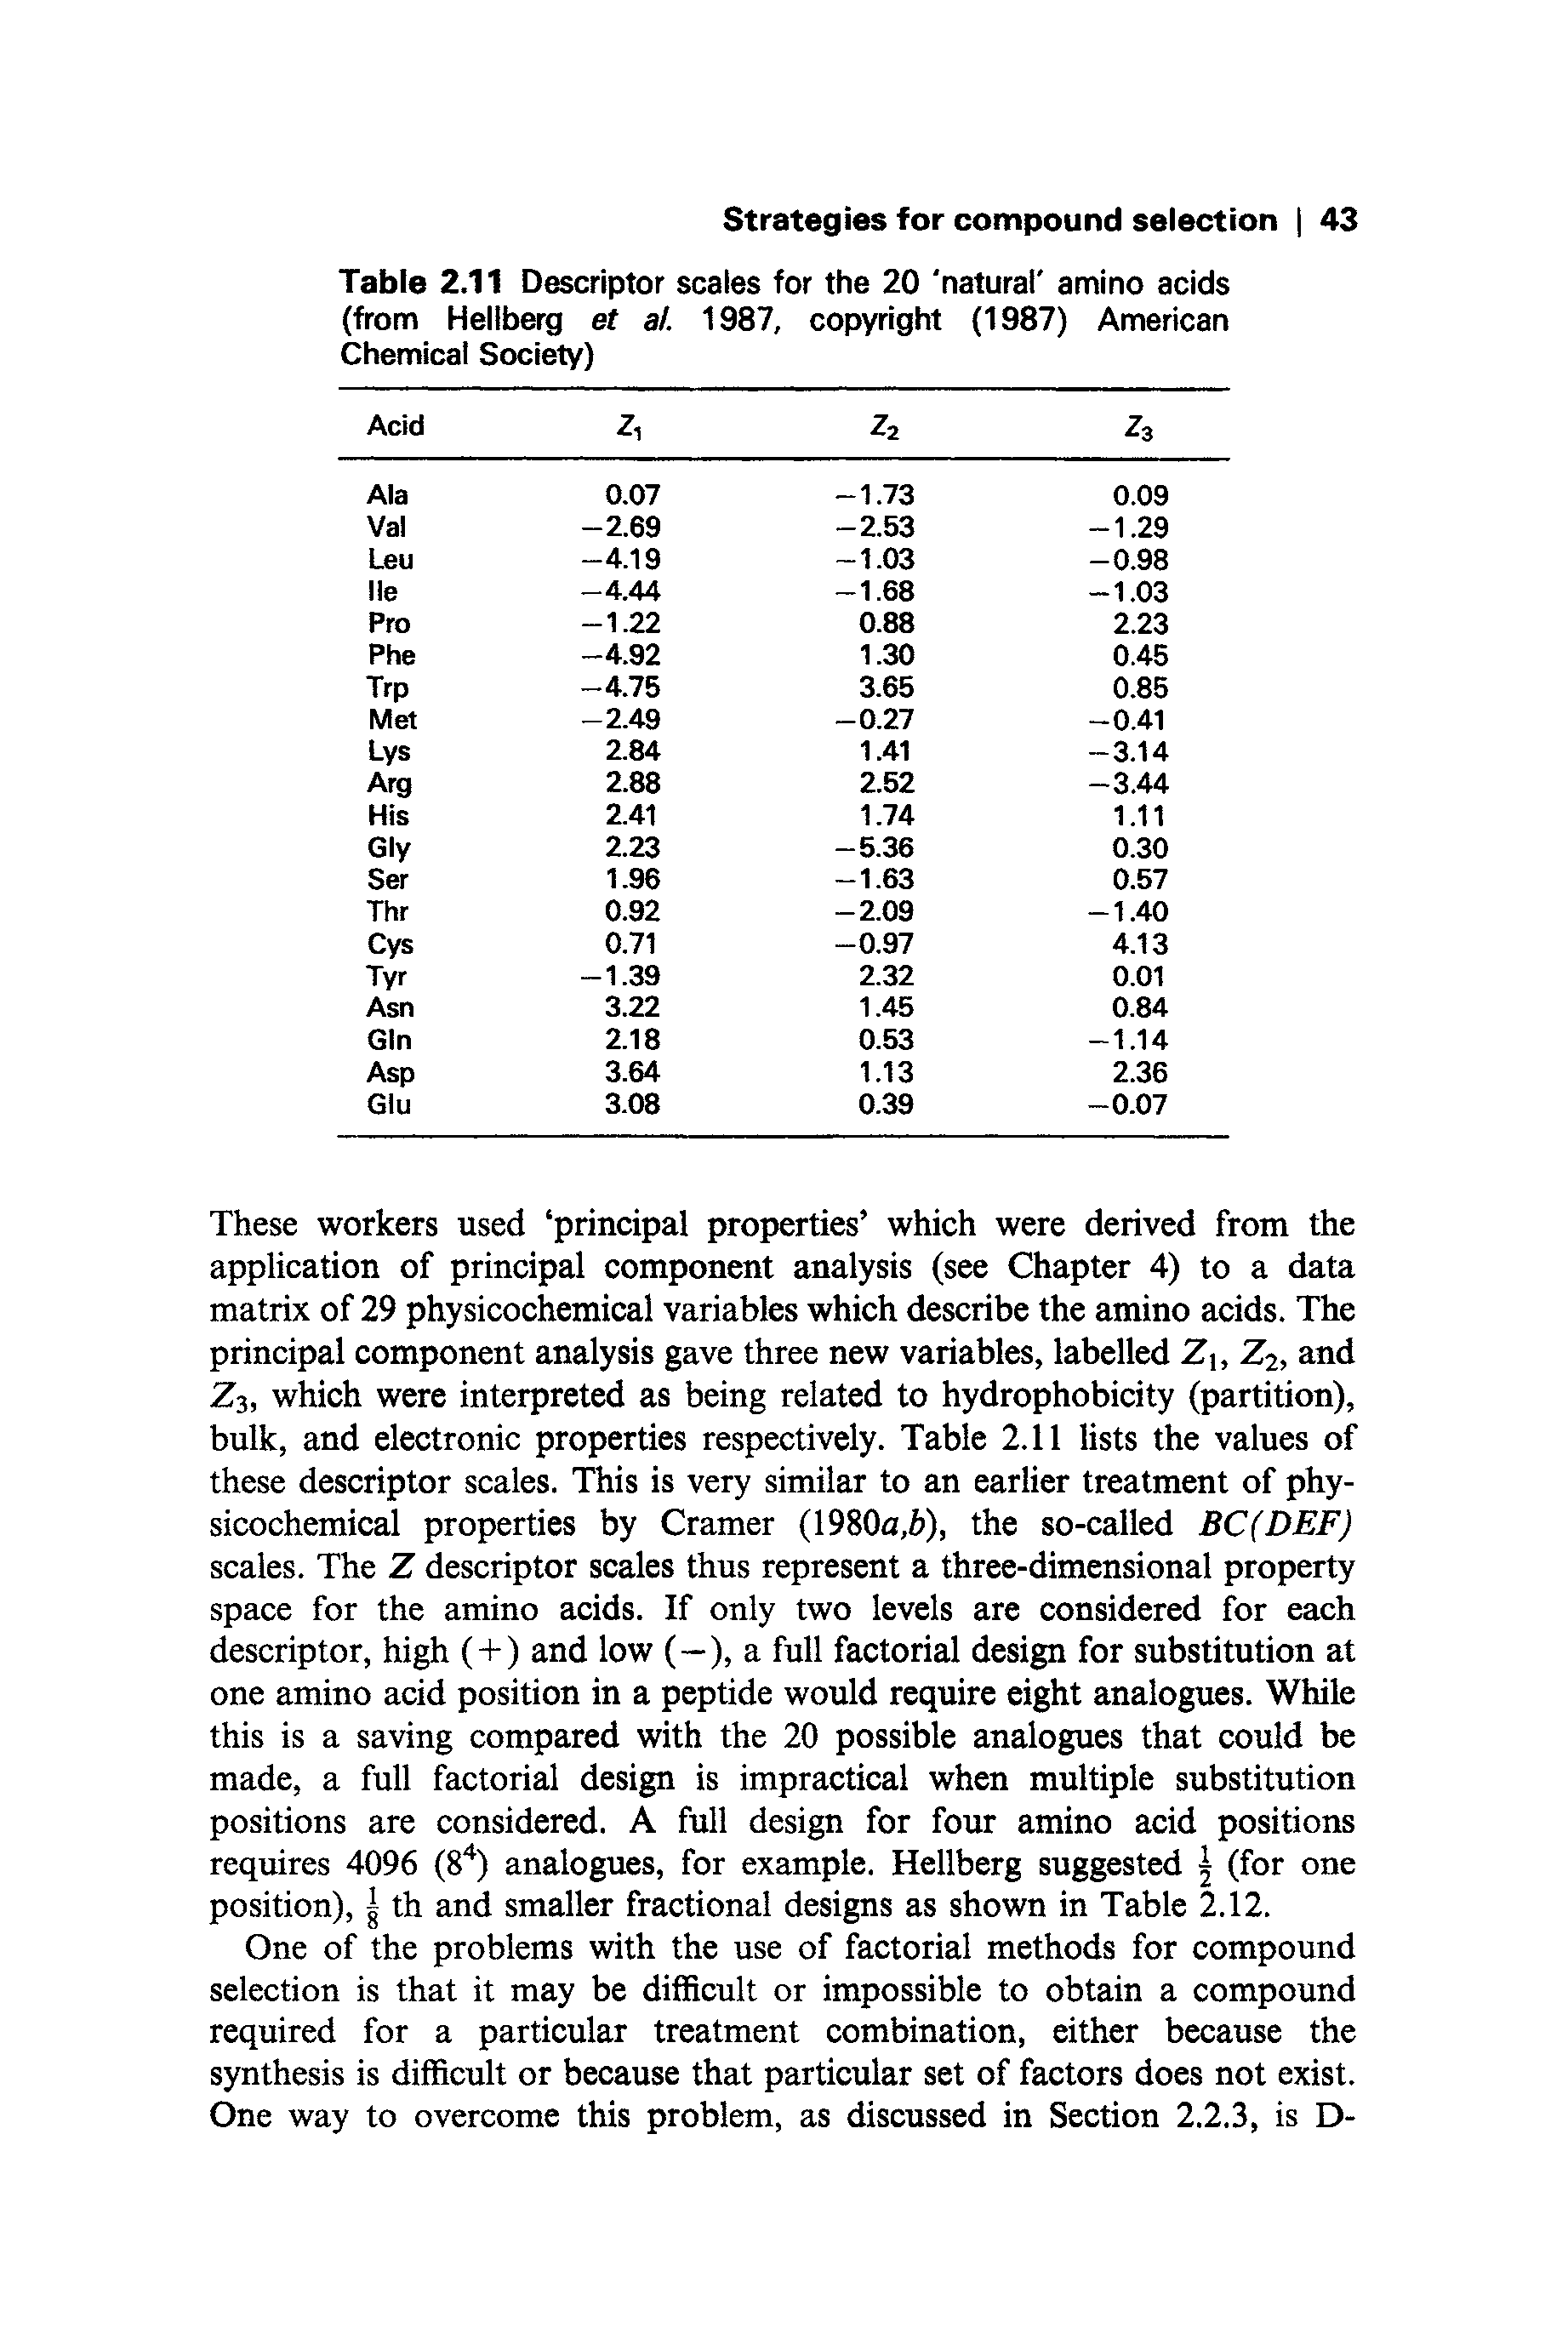 Table 2.11 Descriptor scales for the 20 natural amino acids (from Hellberg et al. 1987, copyright (1987) American Chemical Society)...